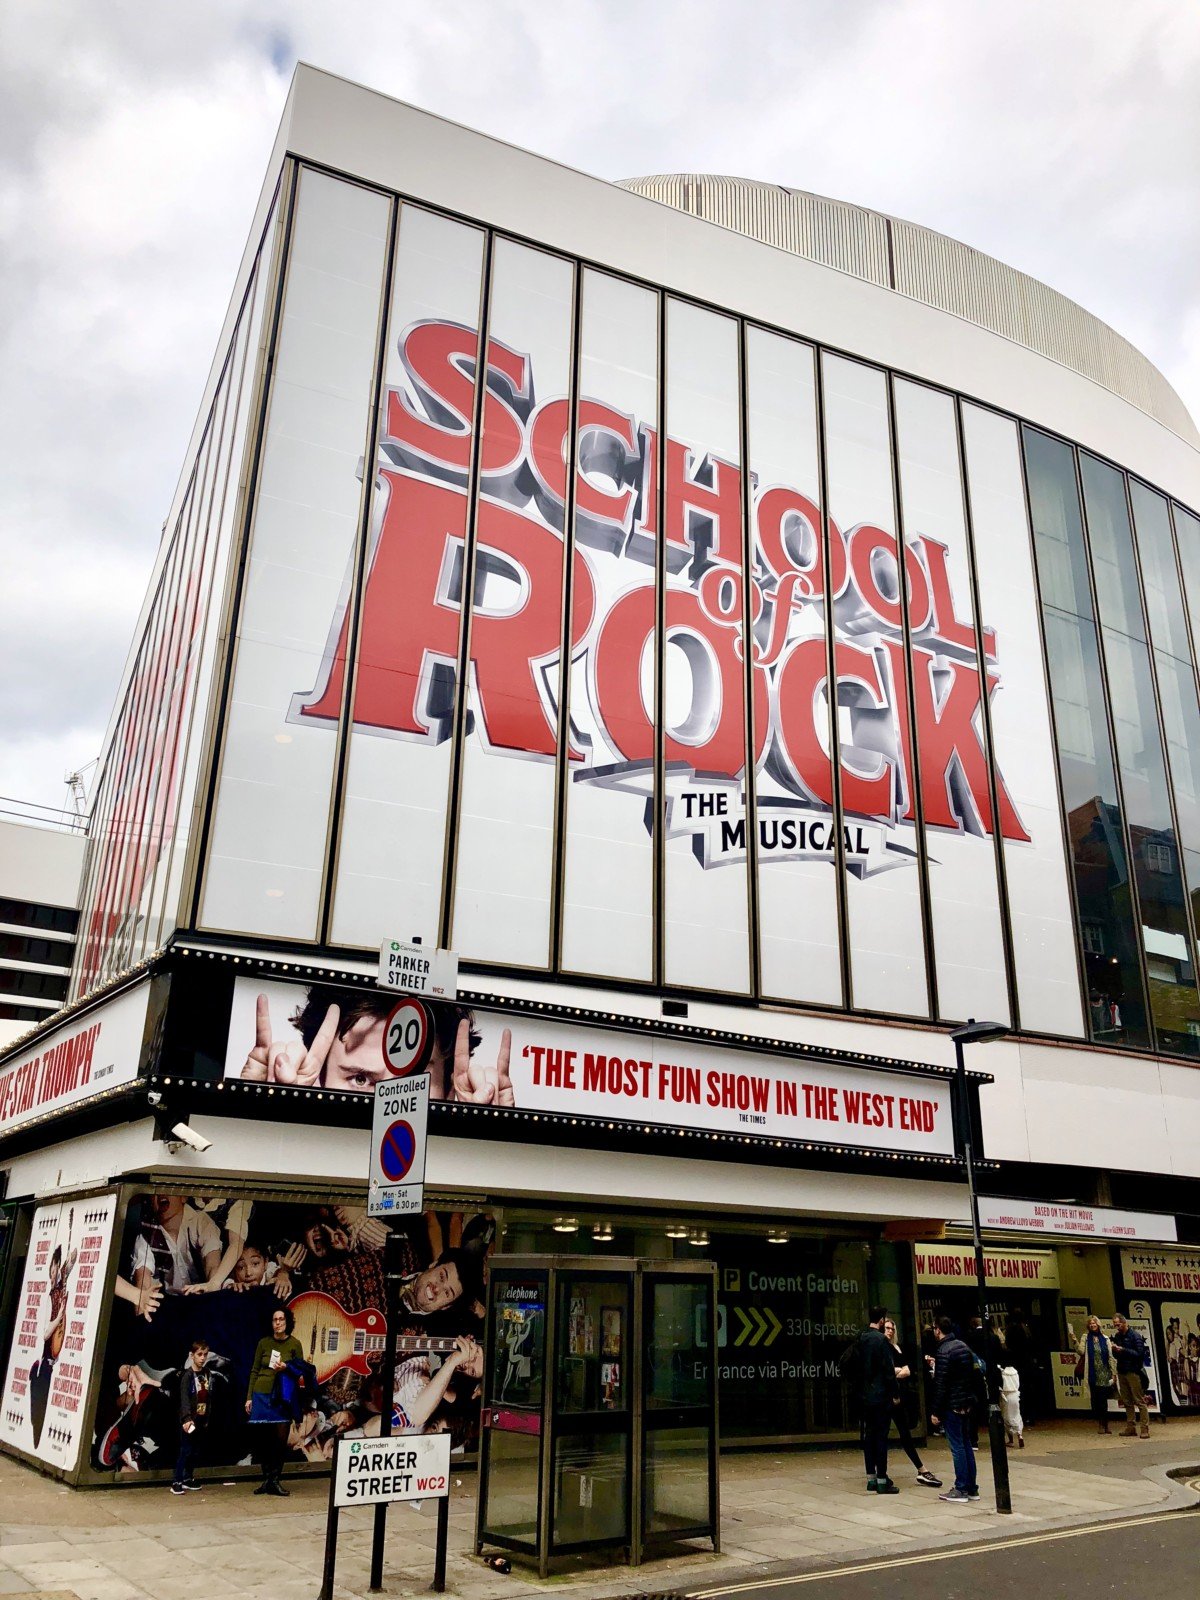 School of Rock the Musical Cheap tickets for as little as £15 in London with the Lottery ticket entry online